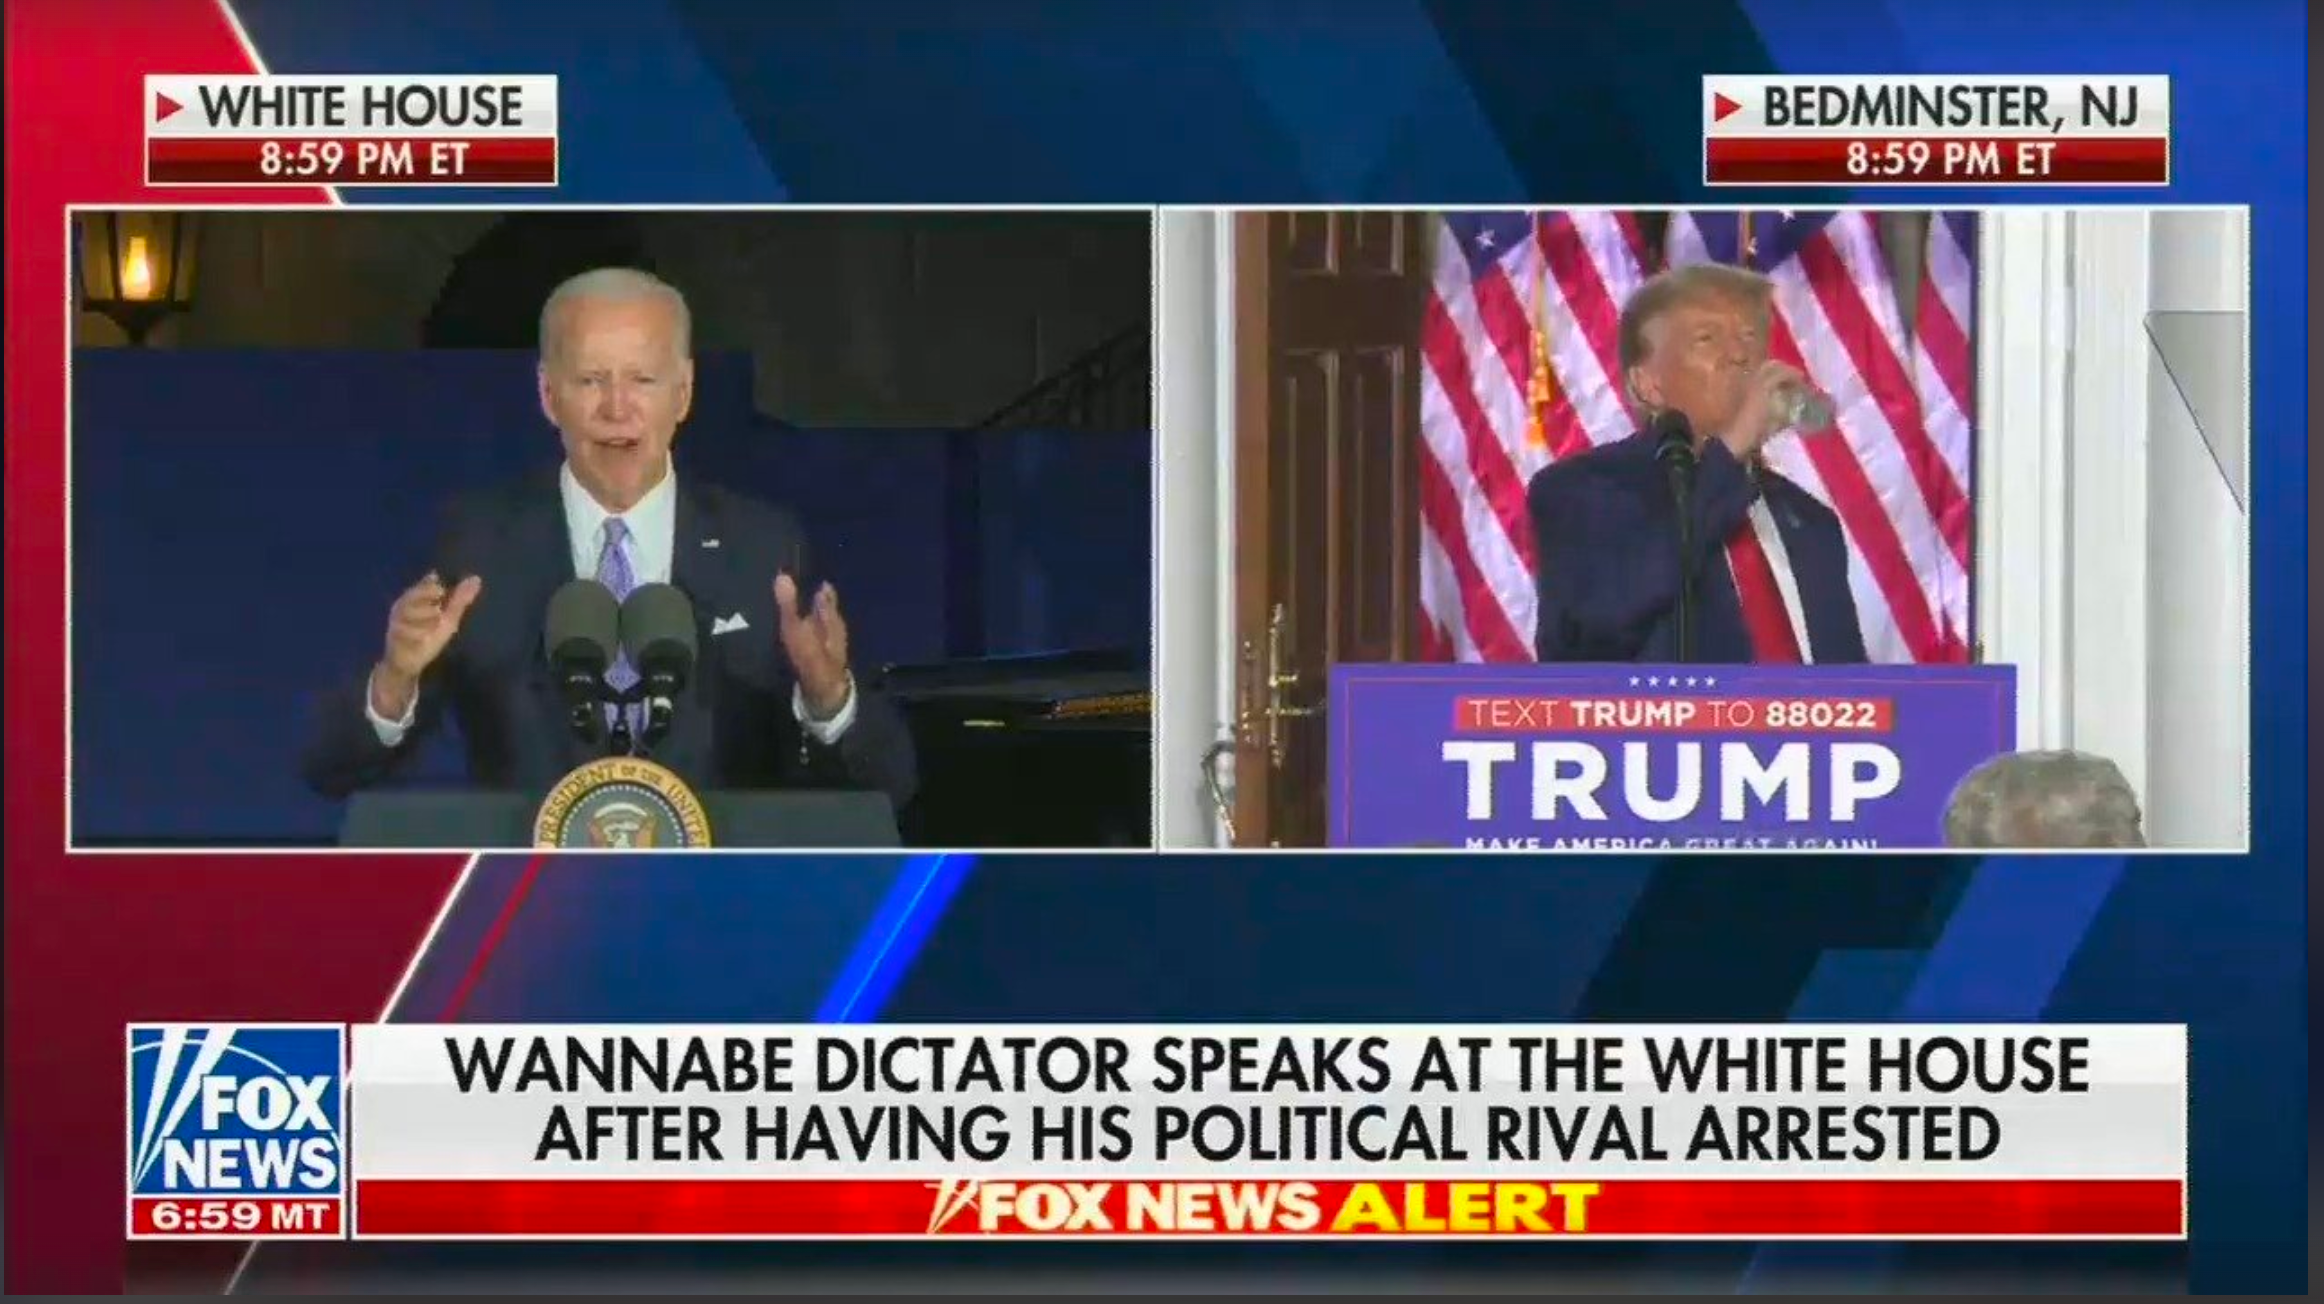 Fox News chyron calls Biden ‘wannabe dictator’ while Trump plays down charges over mishandling nuclear secrets